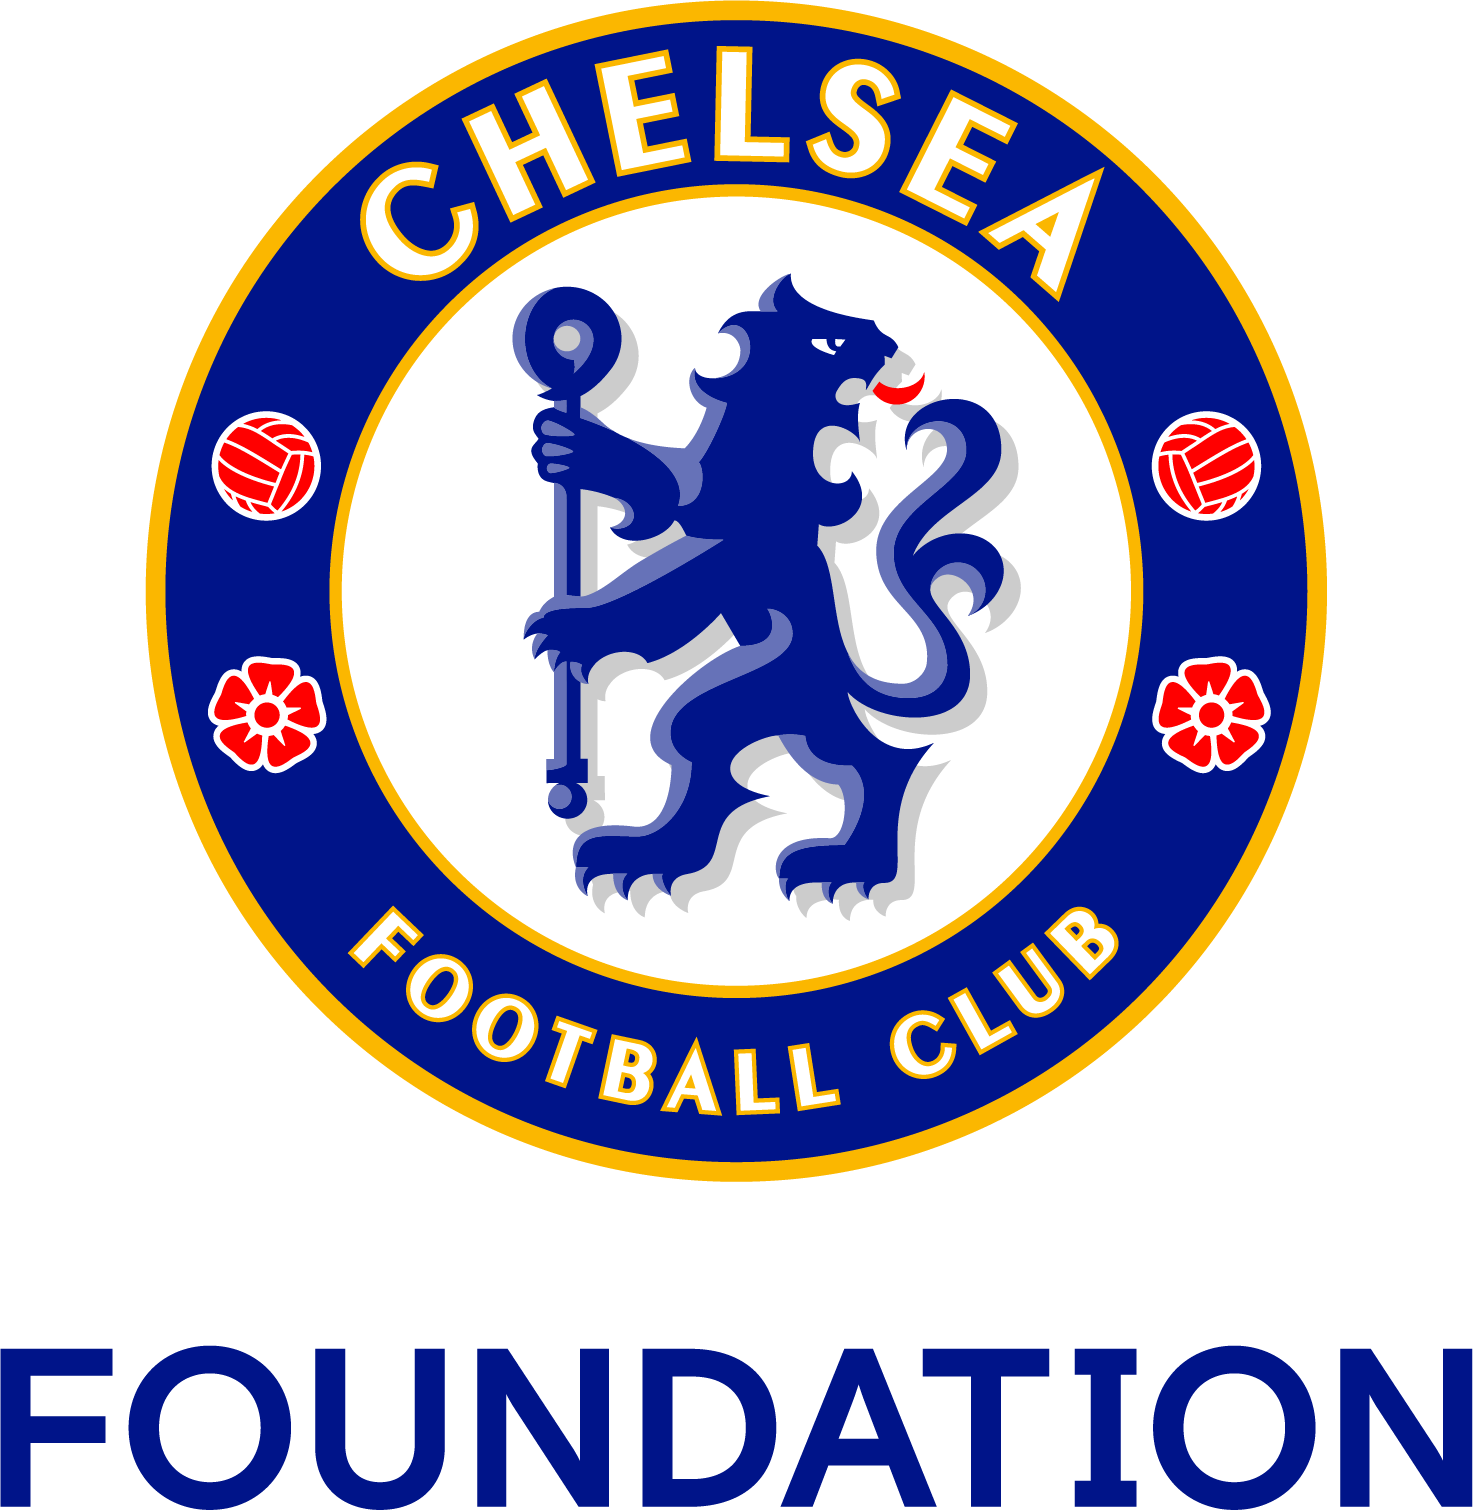 Chelsea Foundation - National Sports Centre Crystal Palace